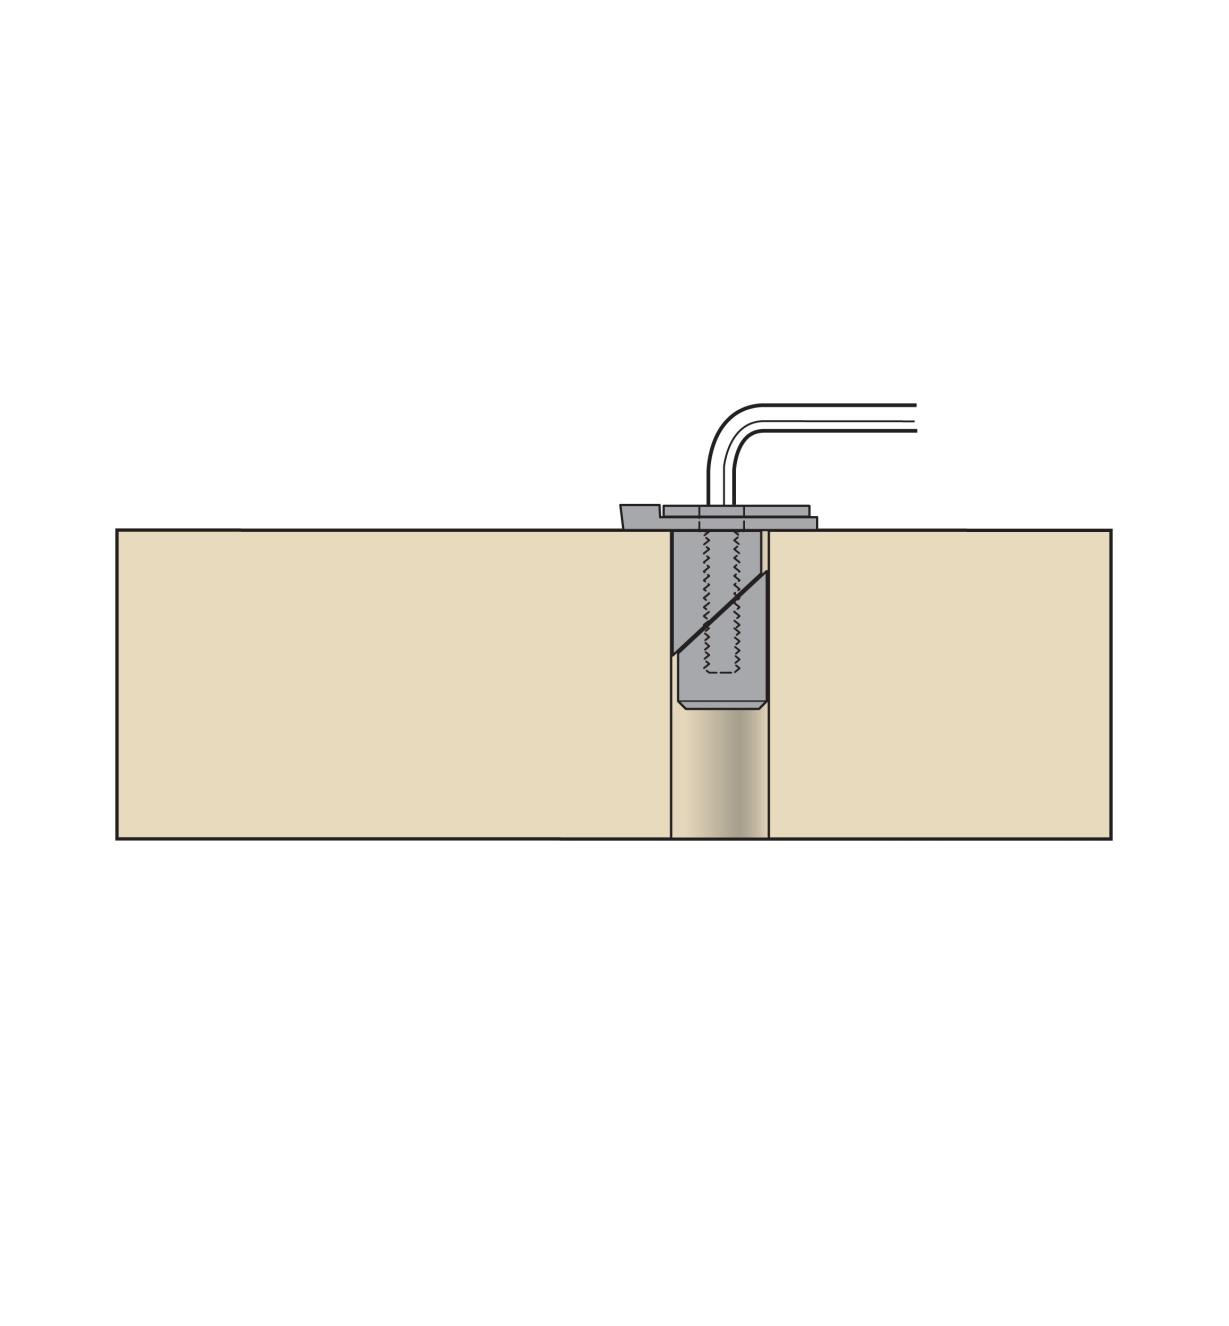 Cutaway illustration of Bench Blade with Wedge-Lock Post installed in a through-hole